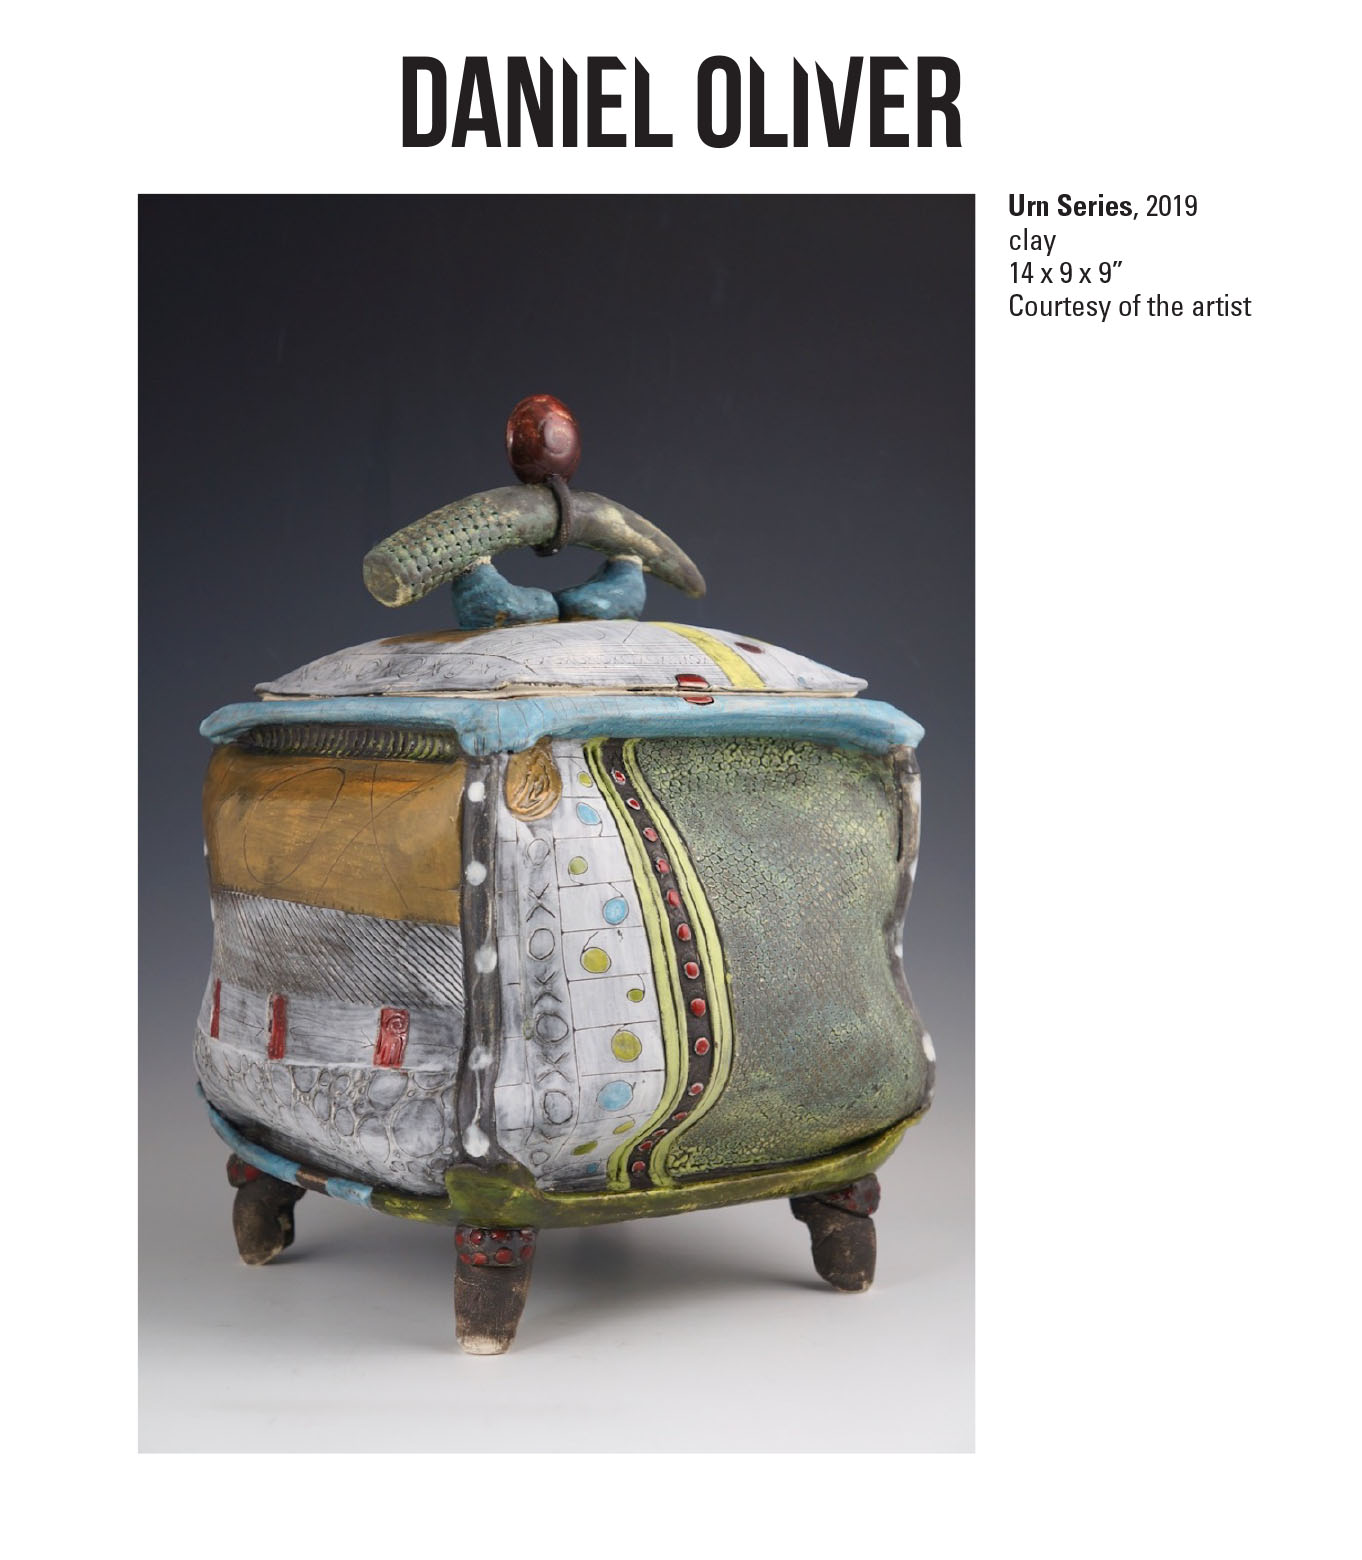 Daniel Oliver, Urn Series, 2019. Clay. 14 x 9 x 9” Courtesy of the artist. A sculpture of a urn with and handle on the top and warped side walls with patterns and buttons on the side